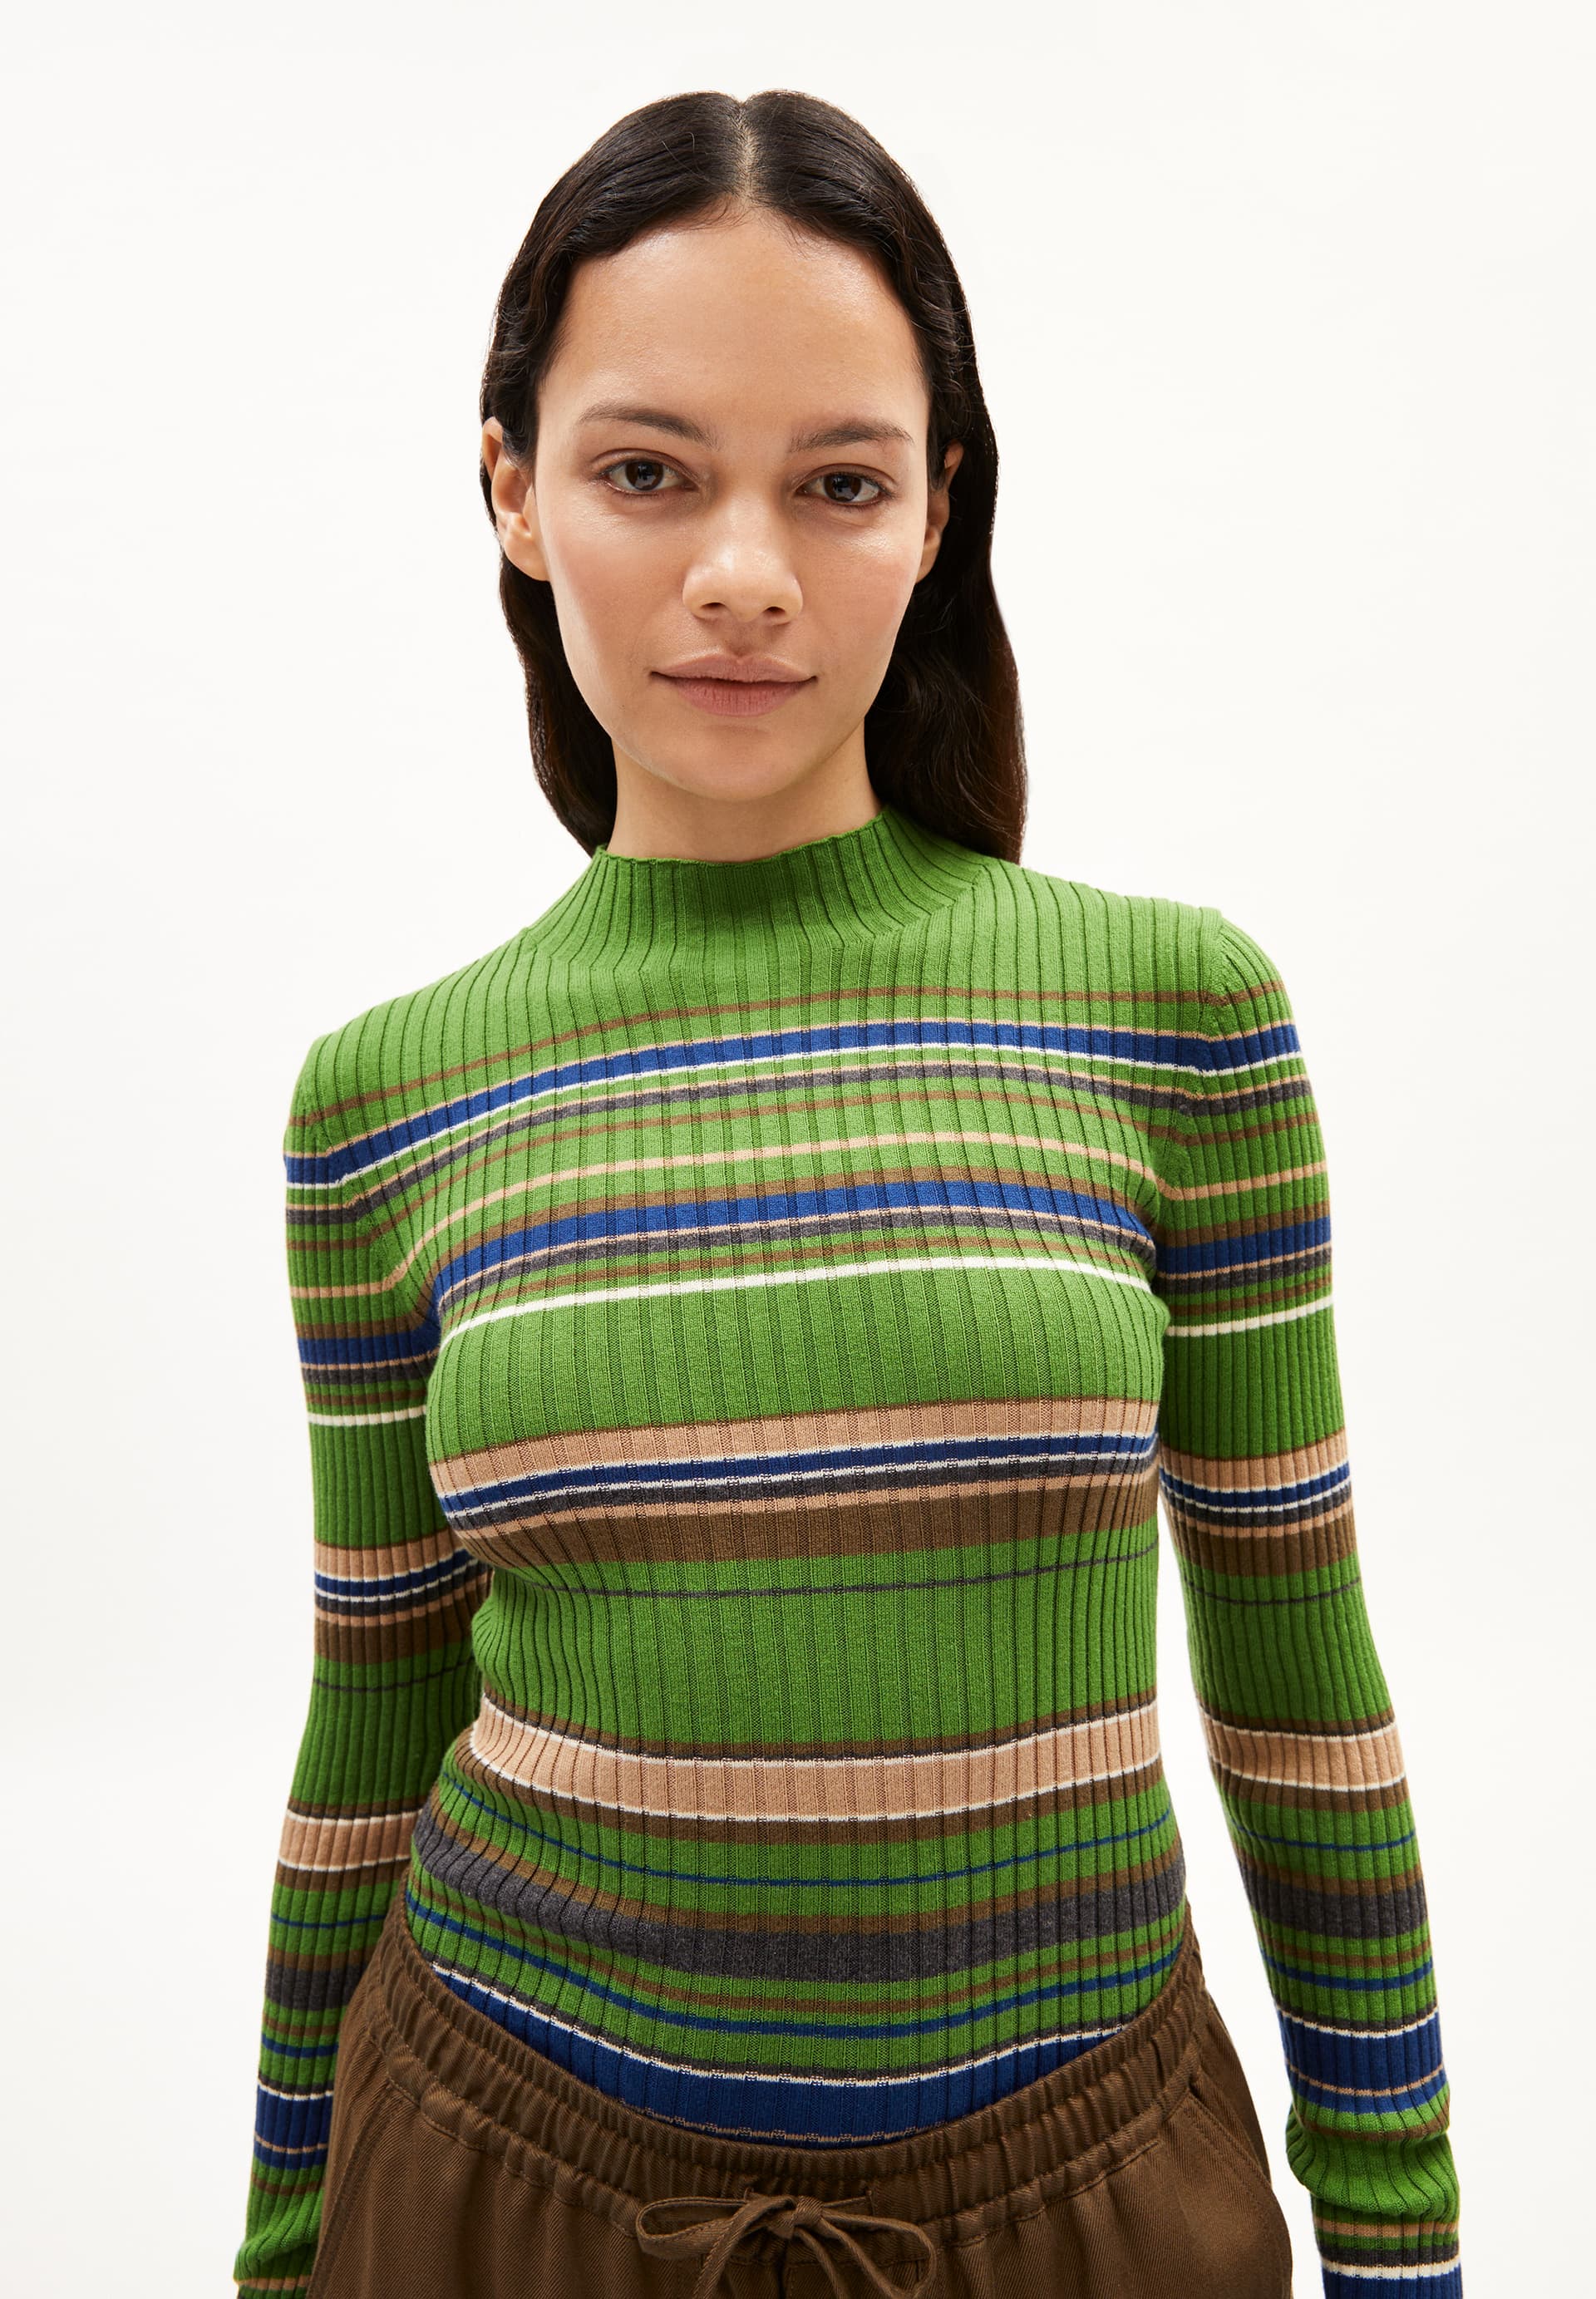 ALAANIA NEW STRIPES Sweater Slim Fit made of Organic Cotton